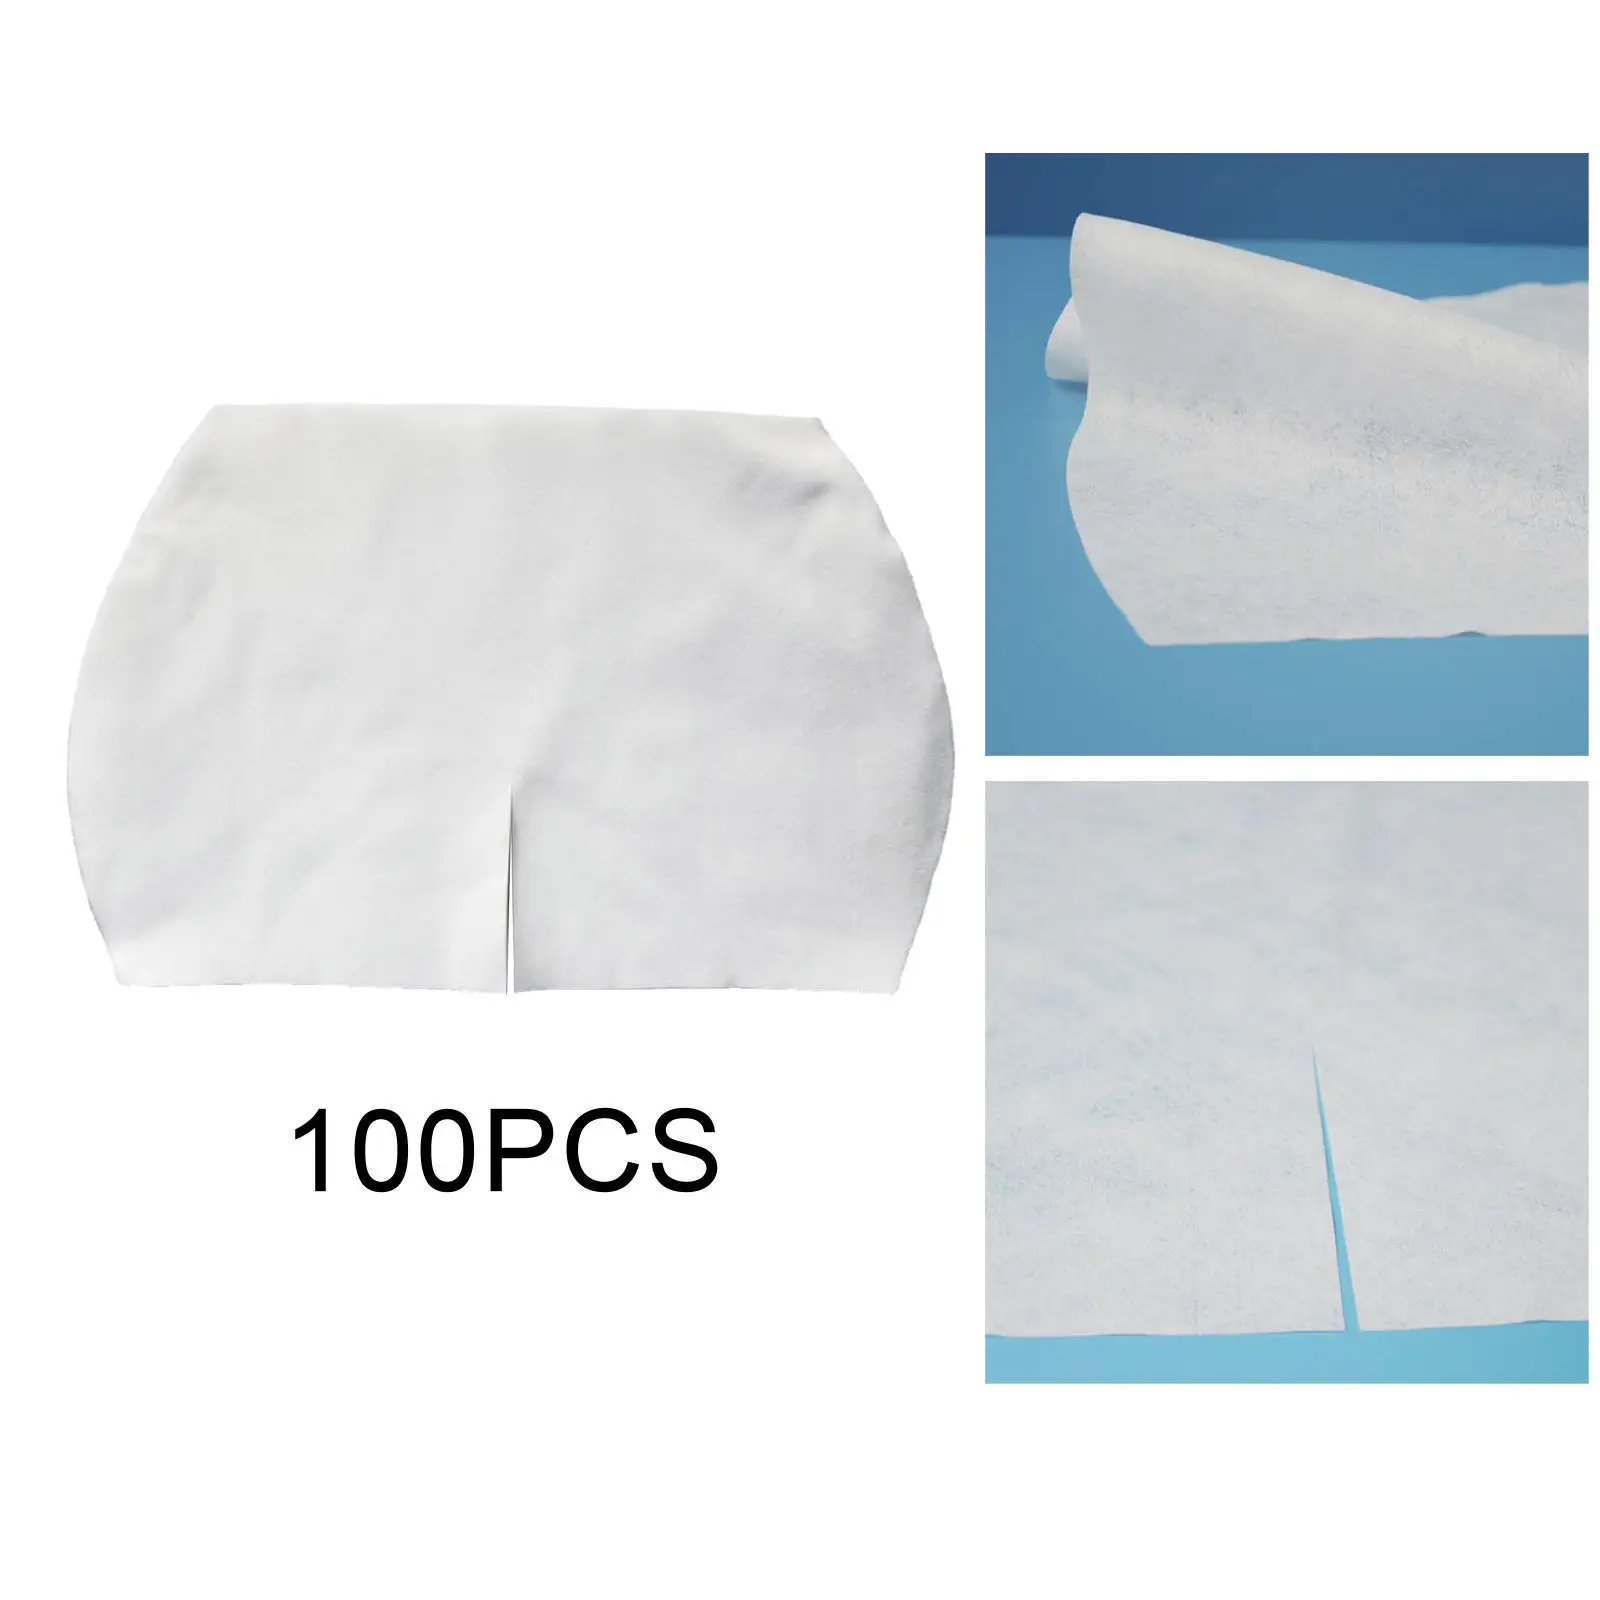 100Pcs Makeup Disposable Non Woven Cotton Hips Paper Pads DIY Hip Protector Easy to Use White Soft Skin Care Hip Guard for Home